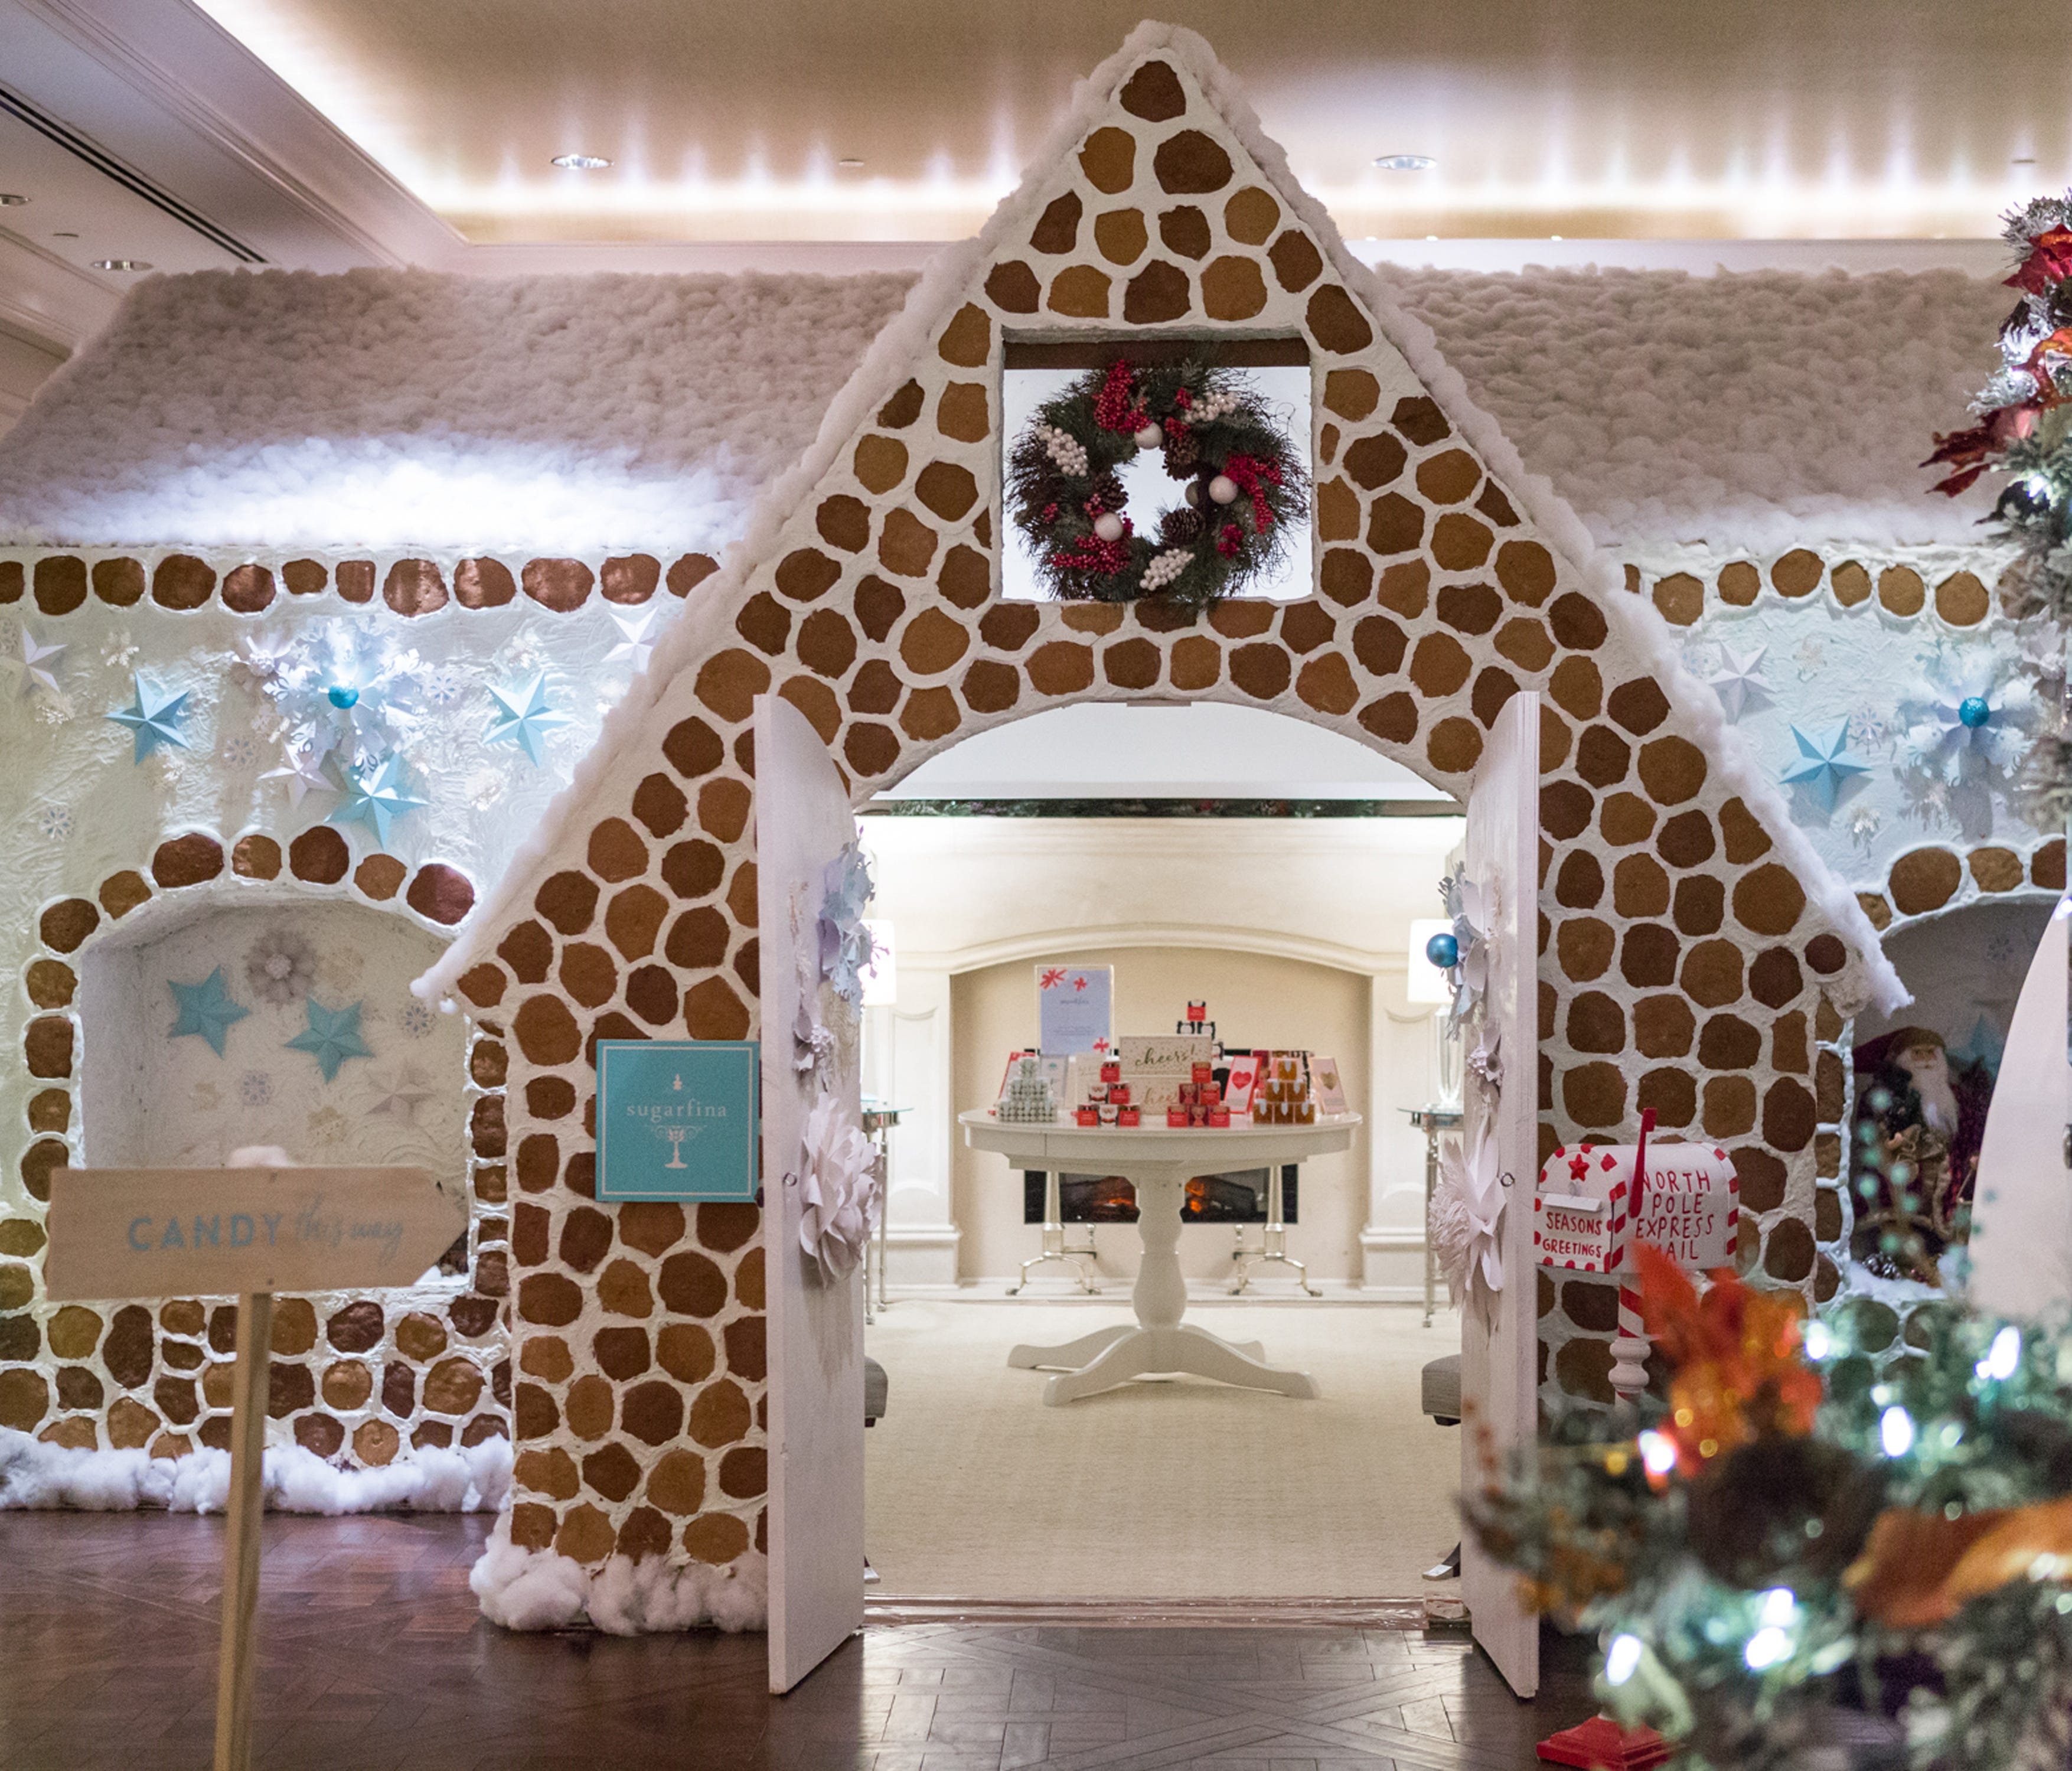 The St. Regis Atlanta hosts the city's largest gingerbread house in its lobby with a Sugarfina pop-up selling high-end candy inside through Jan. 1.